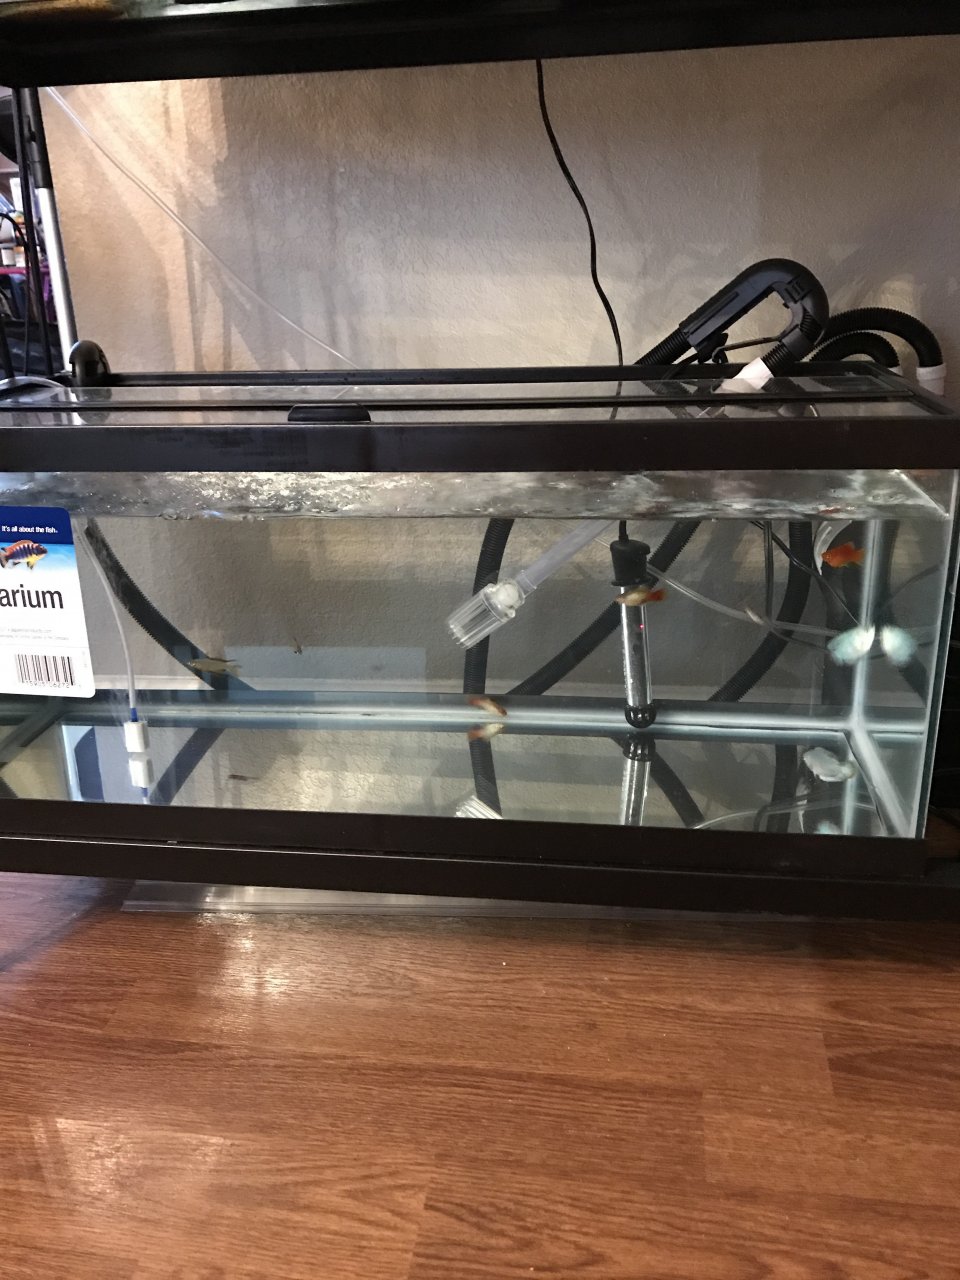 How Long Will It Take To Cycle A 20 Gallon Tank With 13 Fish And A